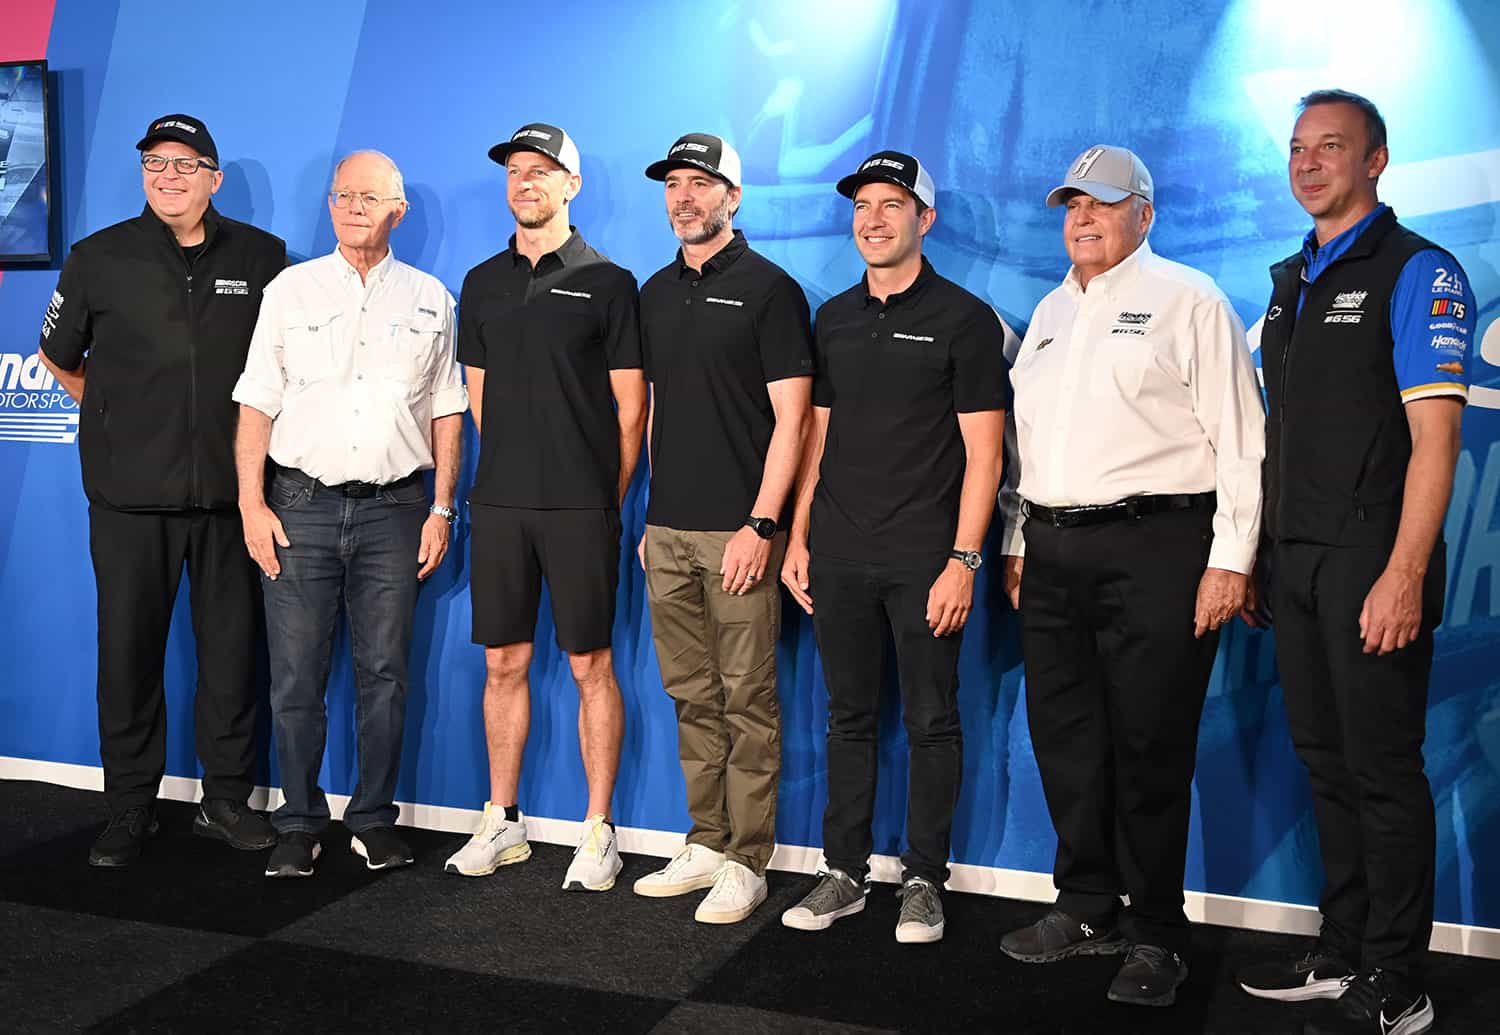 NASCAR CEO Jim France (white shirt, left) stands with Team Garage 56. Photo by Jerry Jordan/Kickin' the Tires.